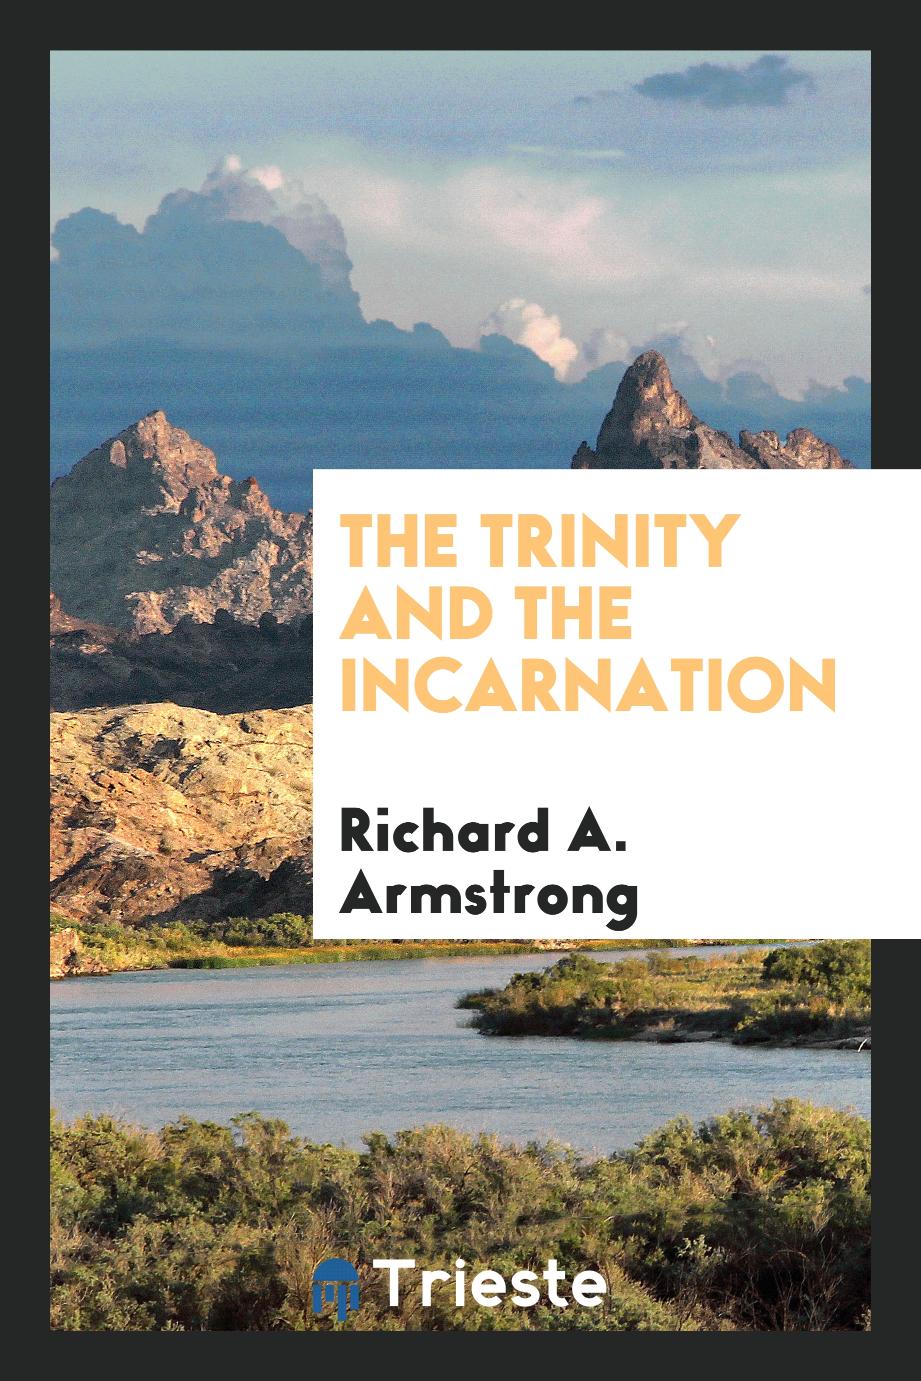 The Trinity and the Incarnation